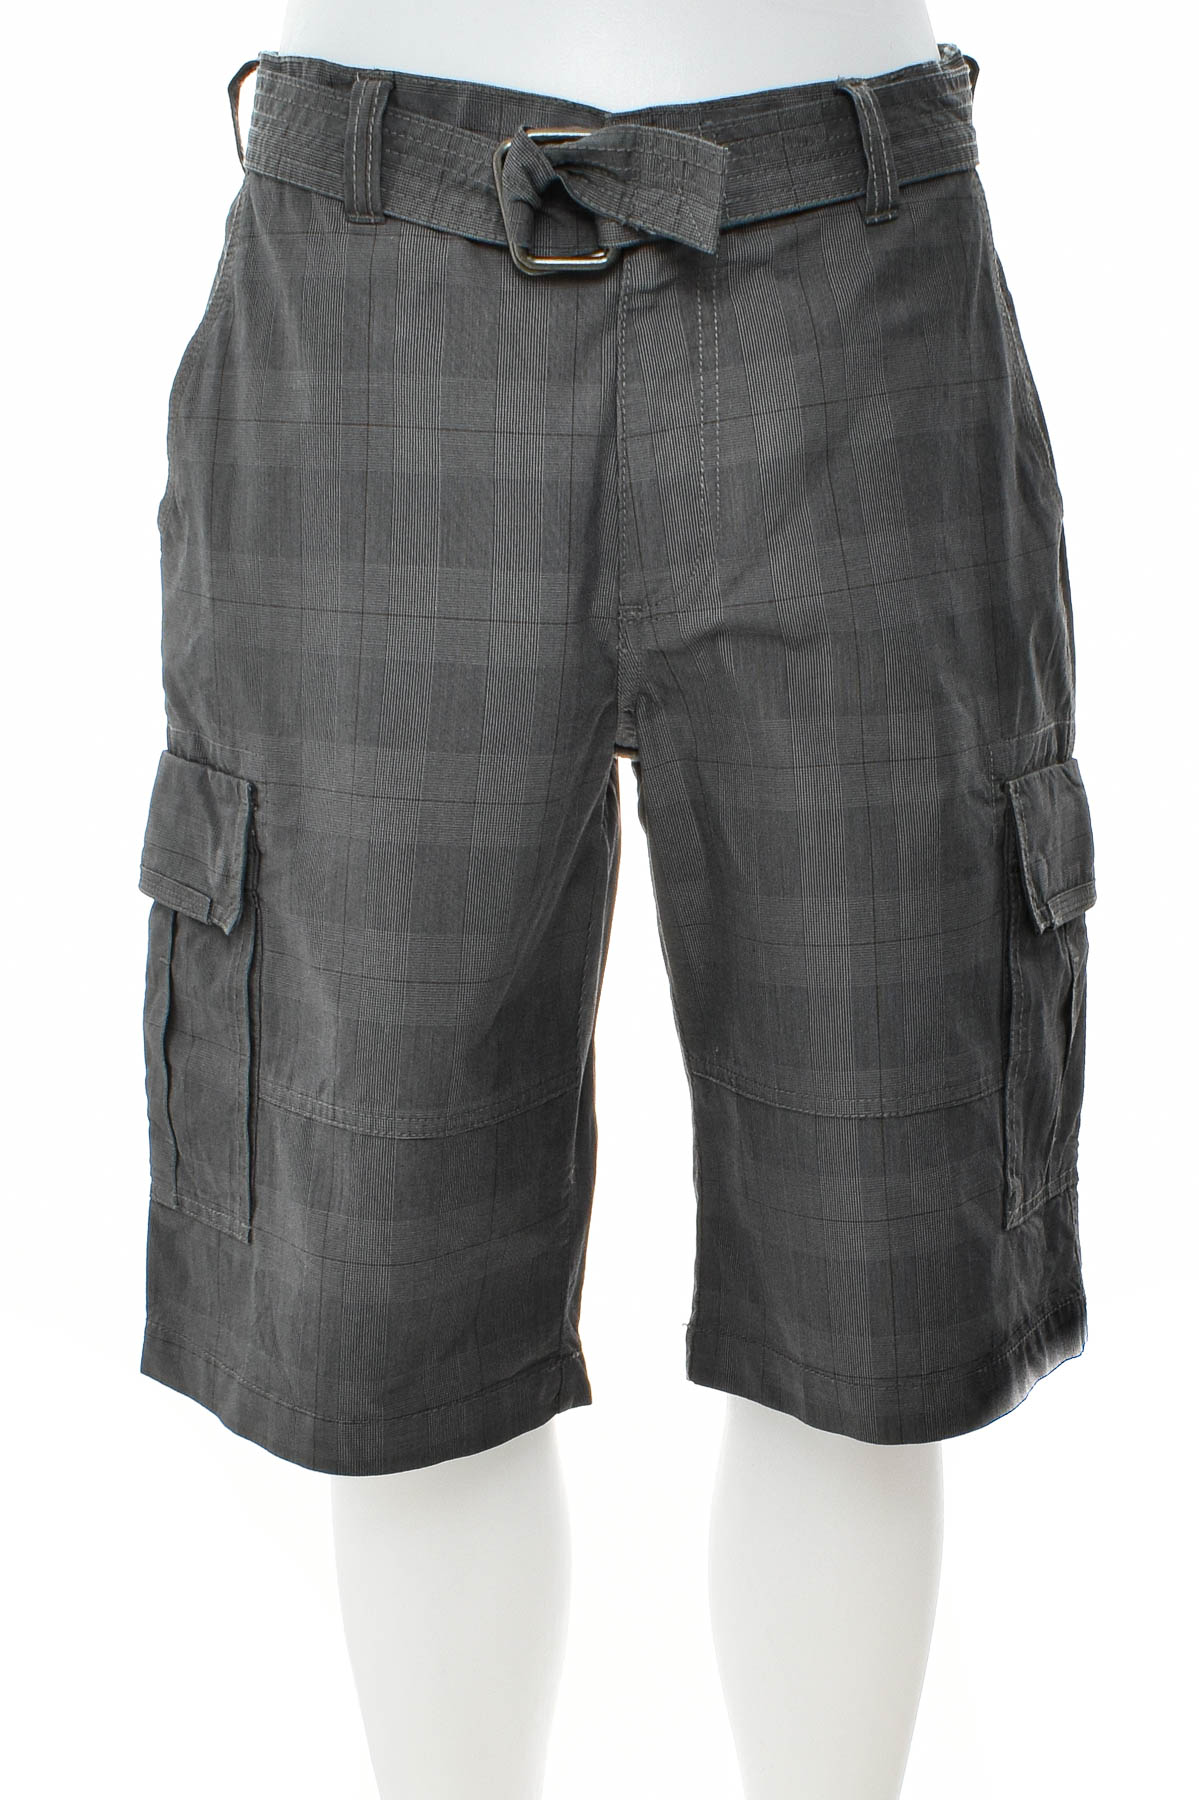 Men's shorts - Coolwater - 0